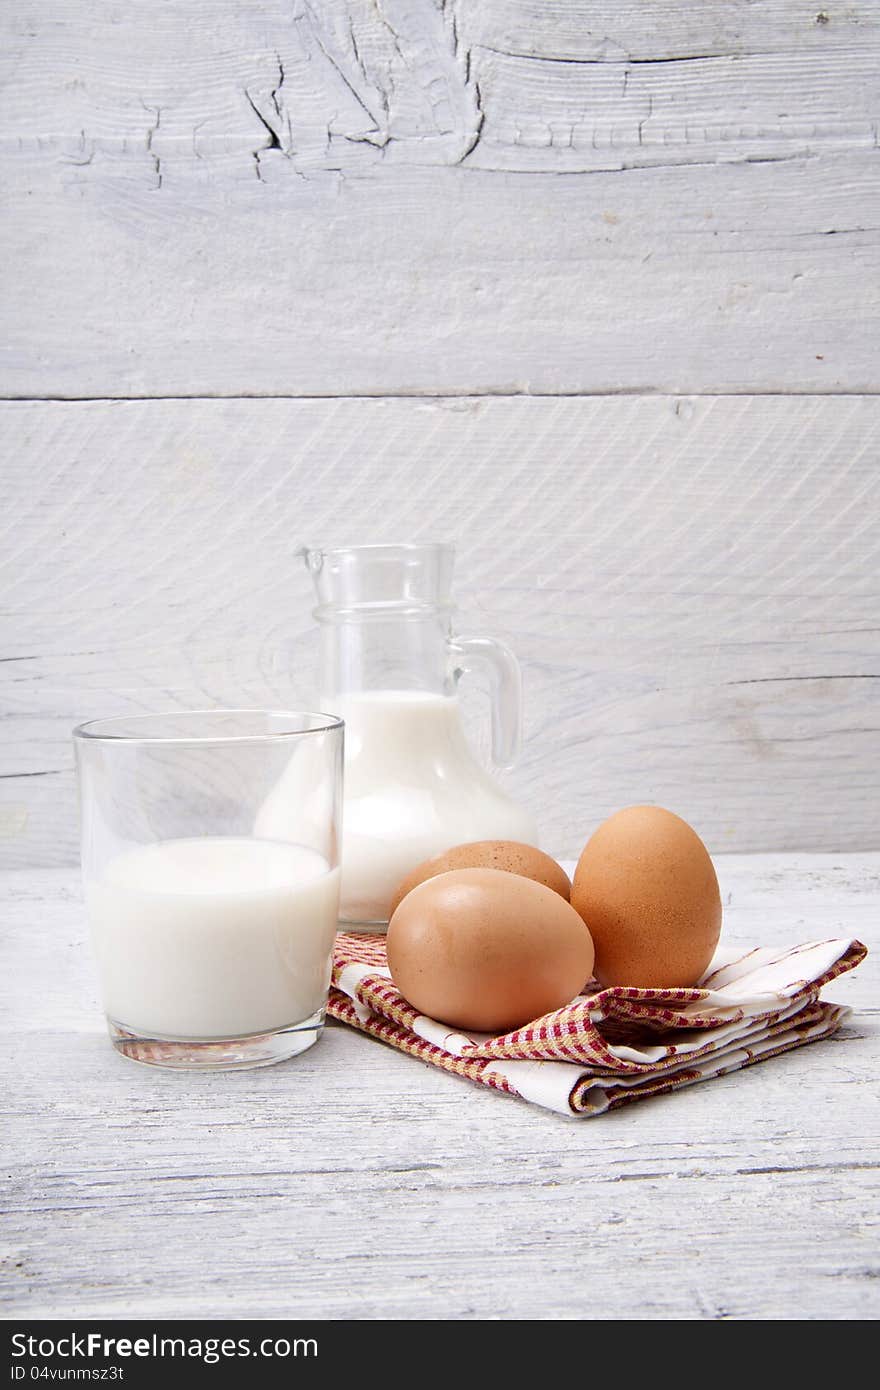 Staple foods in the kitchen, milk and eggs. Staple foods in the kitchen, milk and eggs